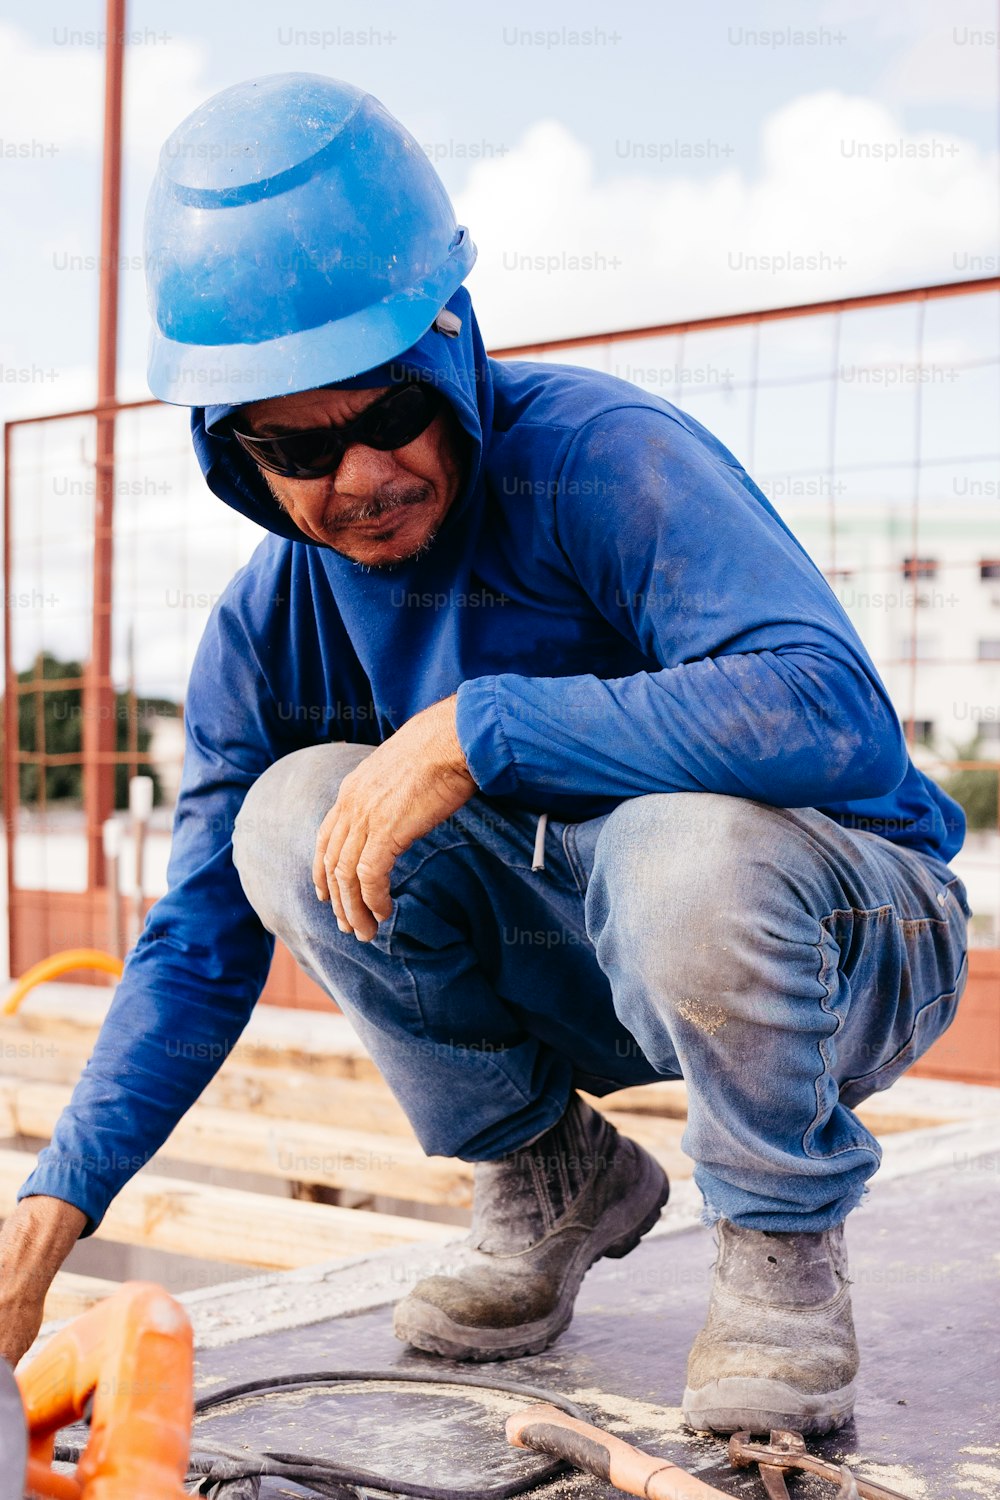 a man wearing a blue helmet is working on a piece of wood